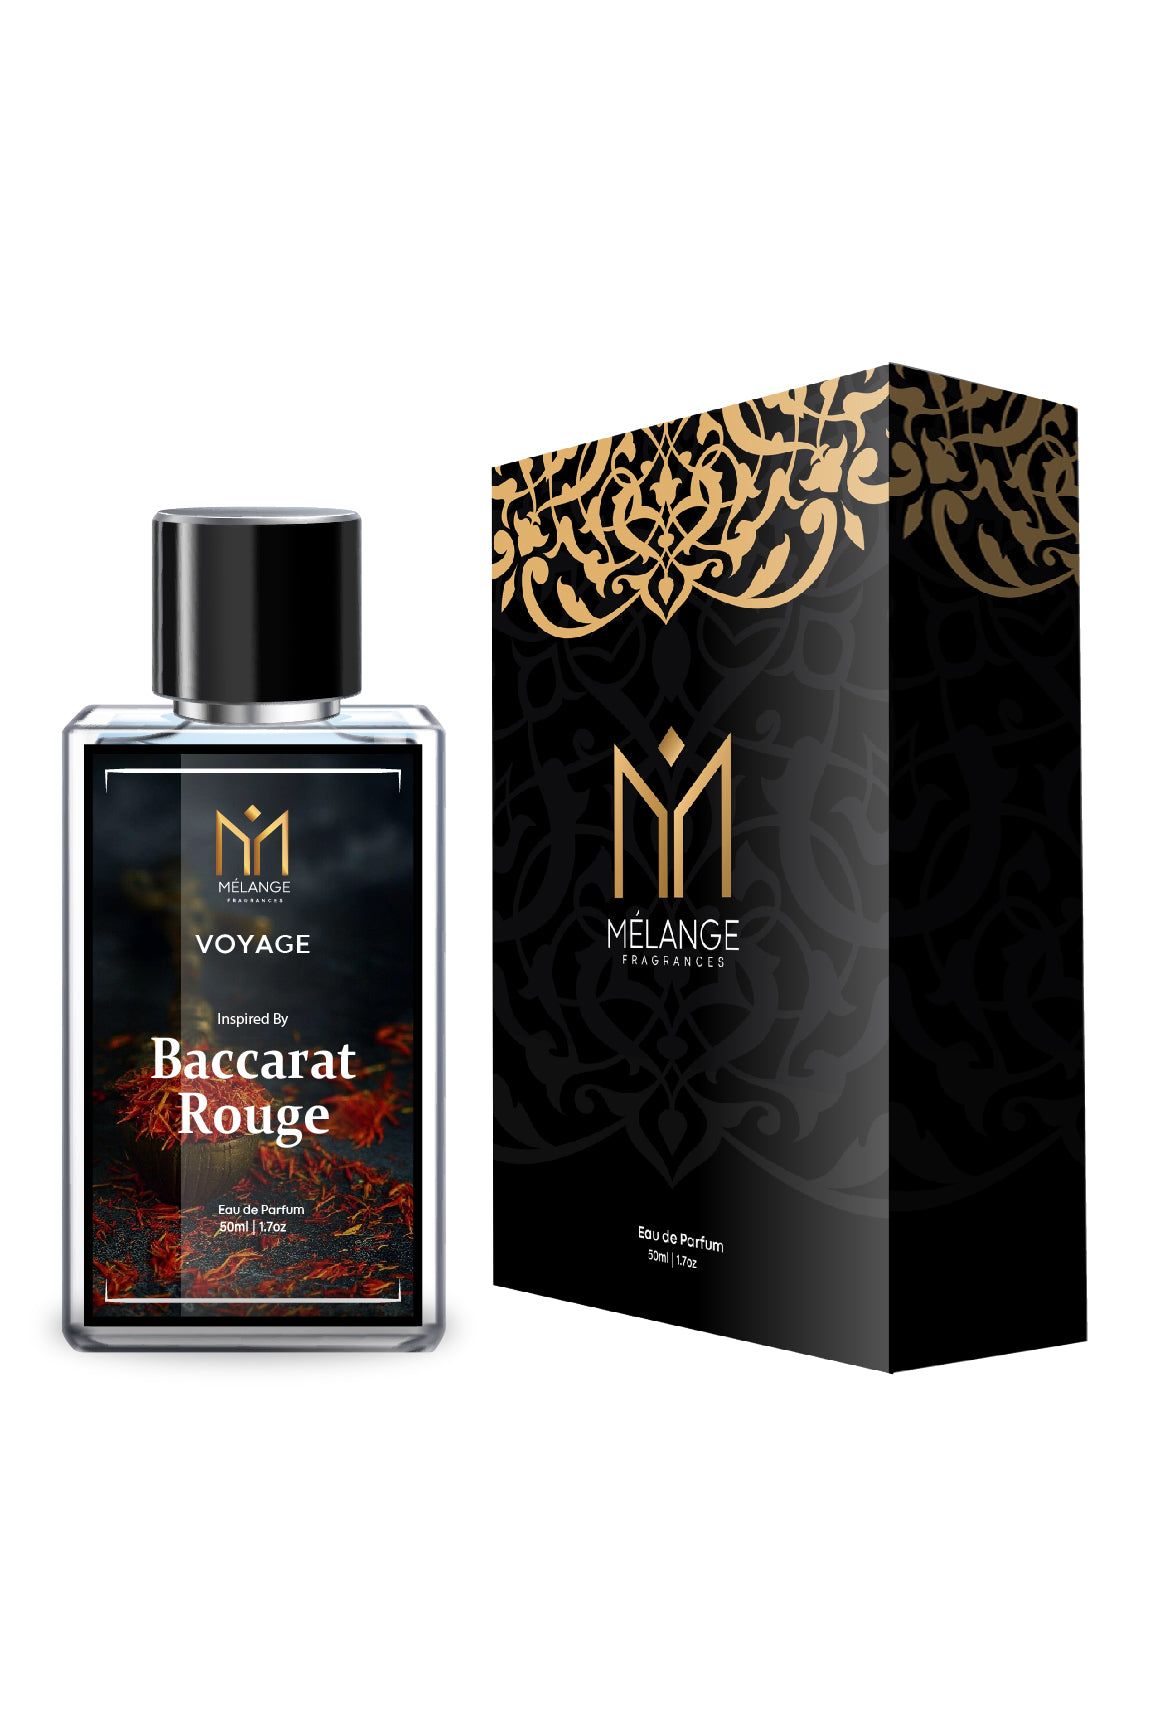 VOYAGE- Inspired By Baccarat Rouge